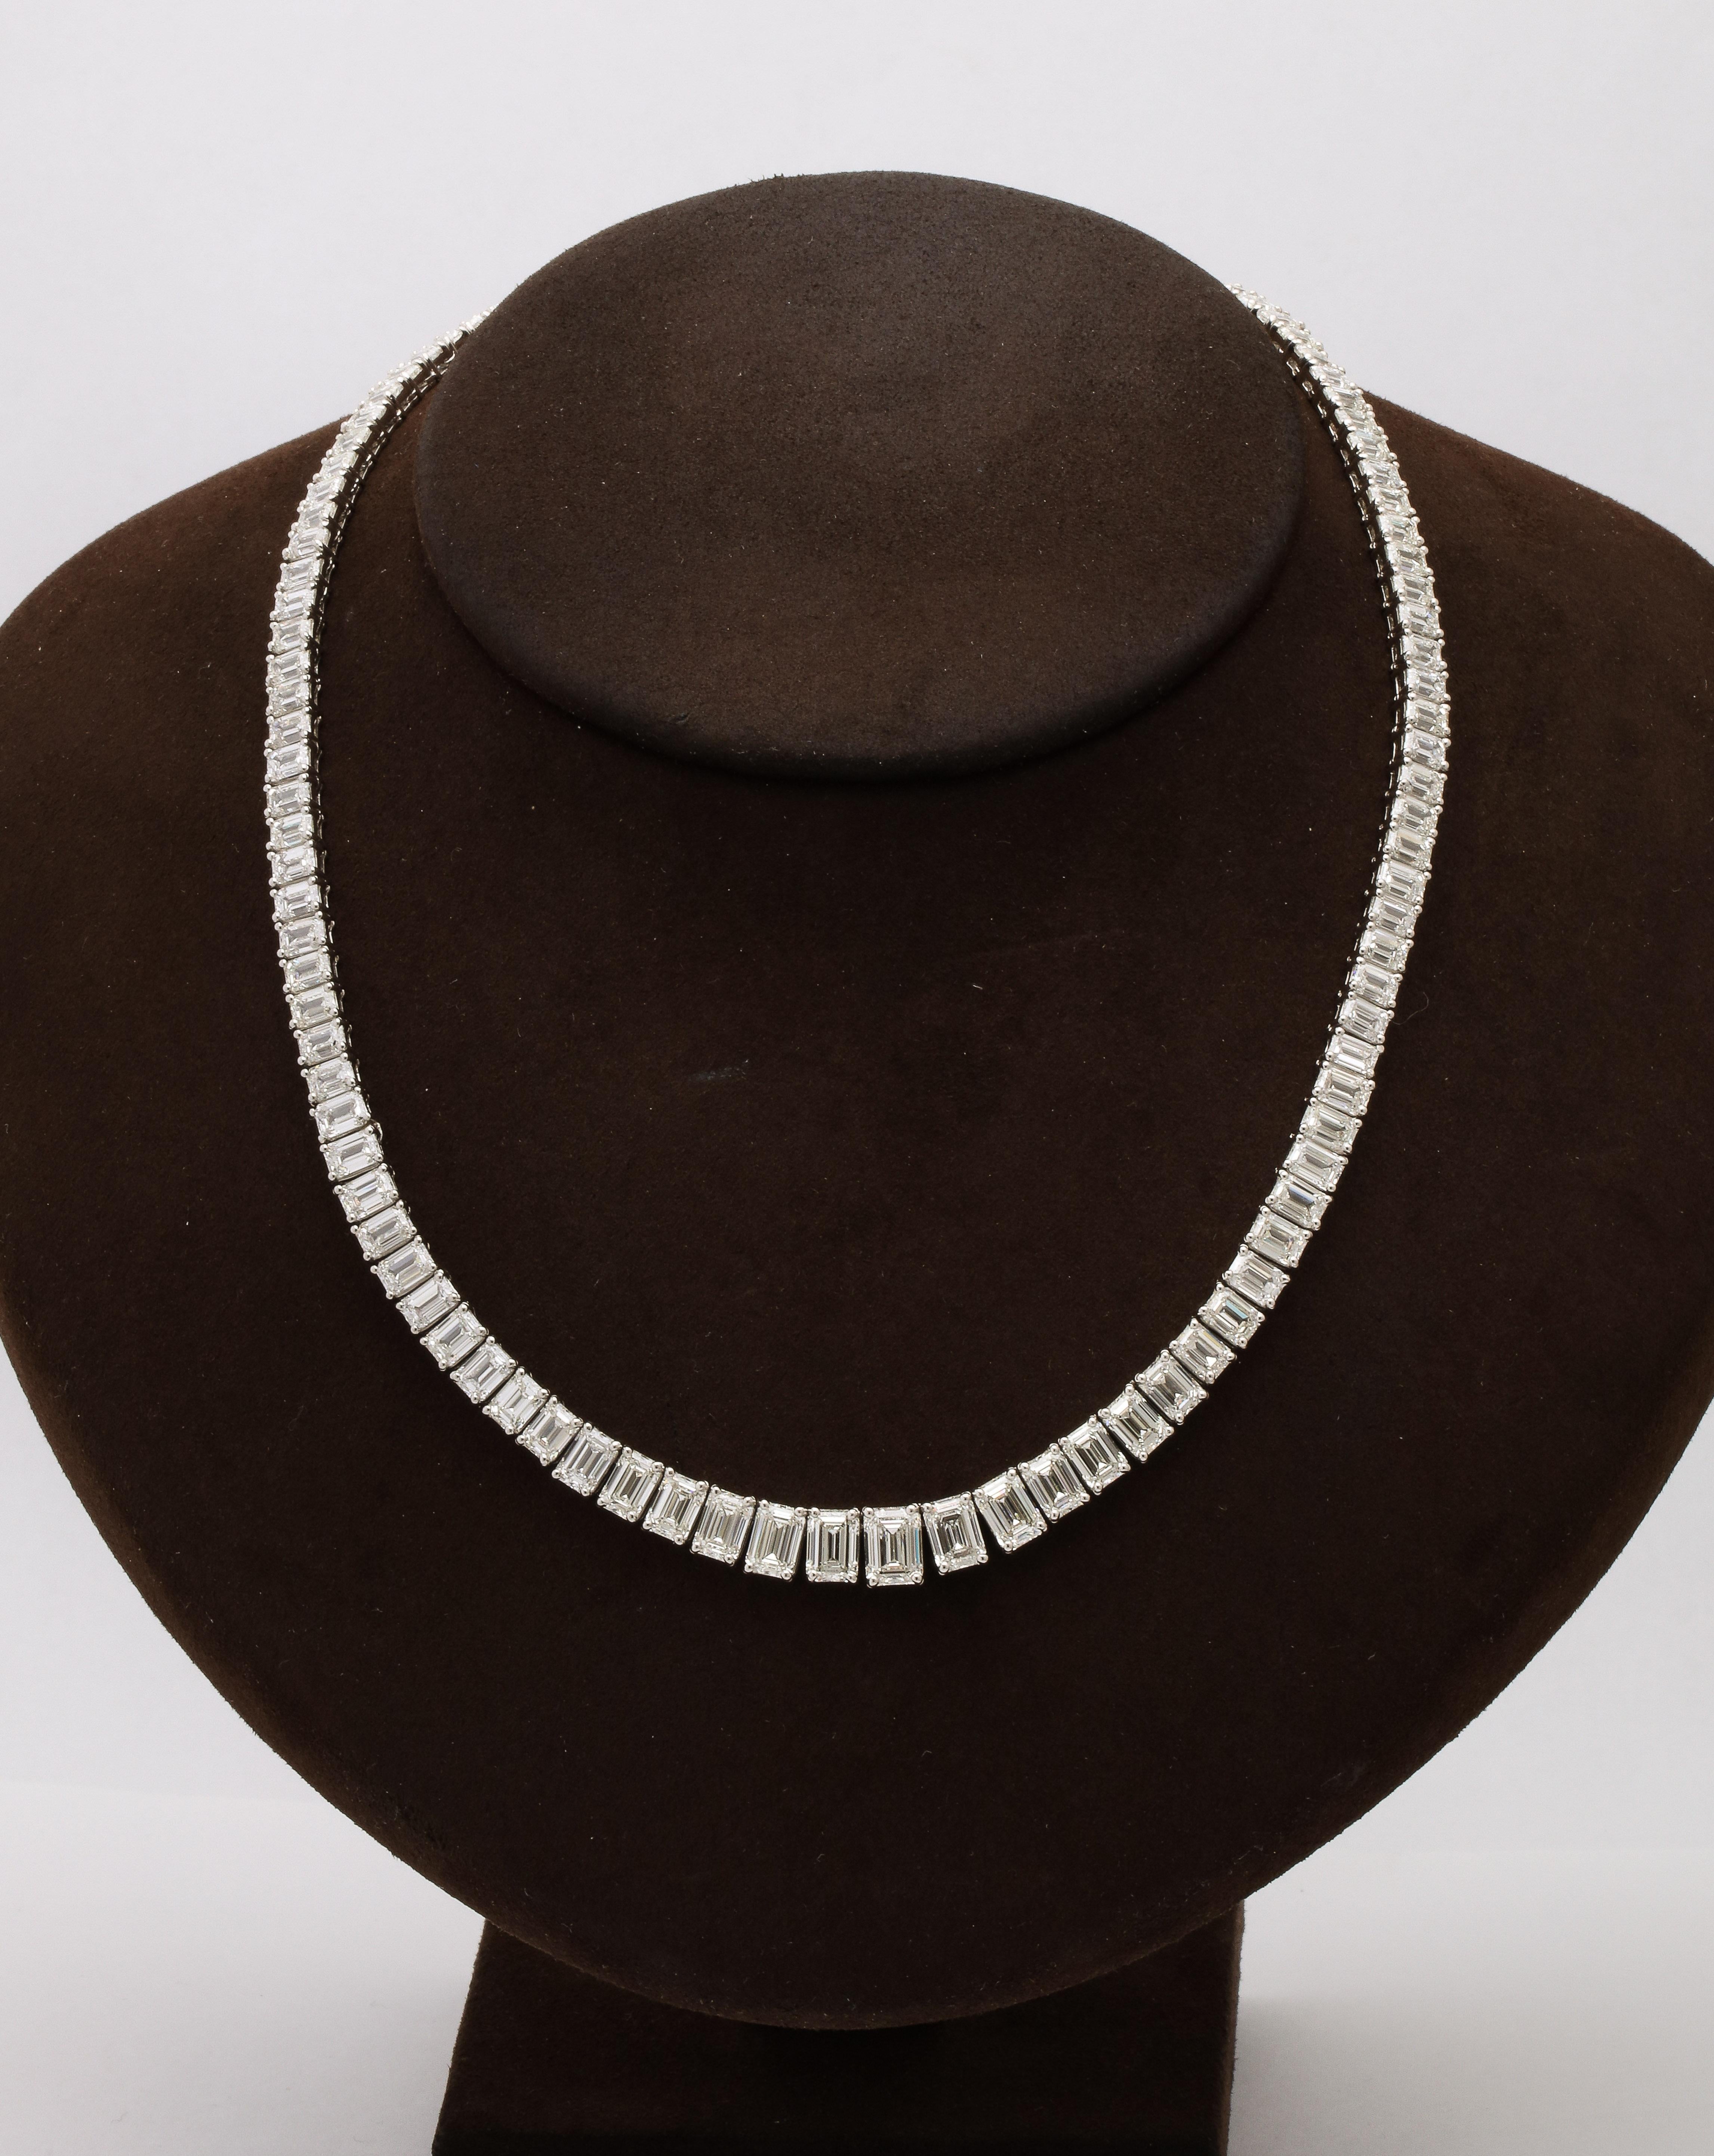 
A Stunning Piece!! 

47.56 carats of white VS+ Emerald cut diamonds. The center diamond weighs 1.50 carats. 

16.5 inch length. 

Set in platinum. 

The necklace is accompanied by multiple GIA certificates. 